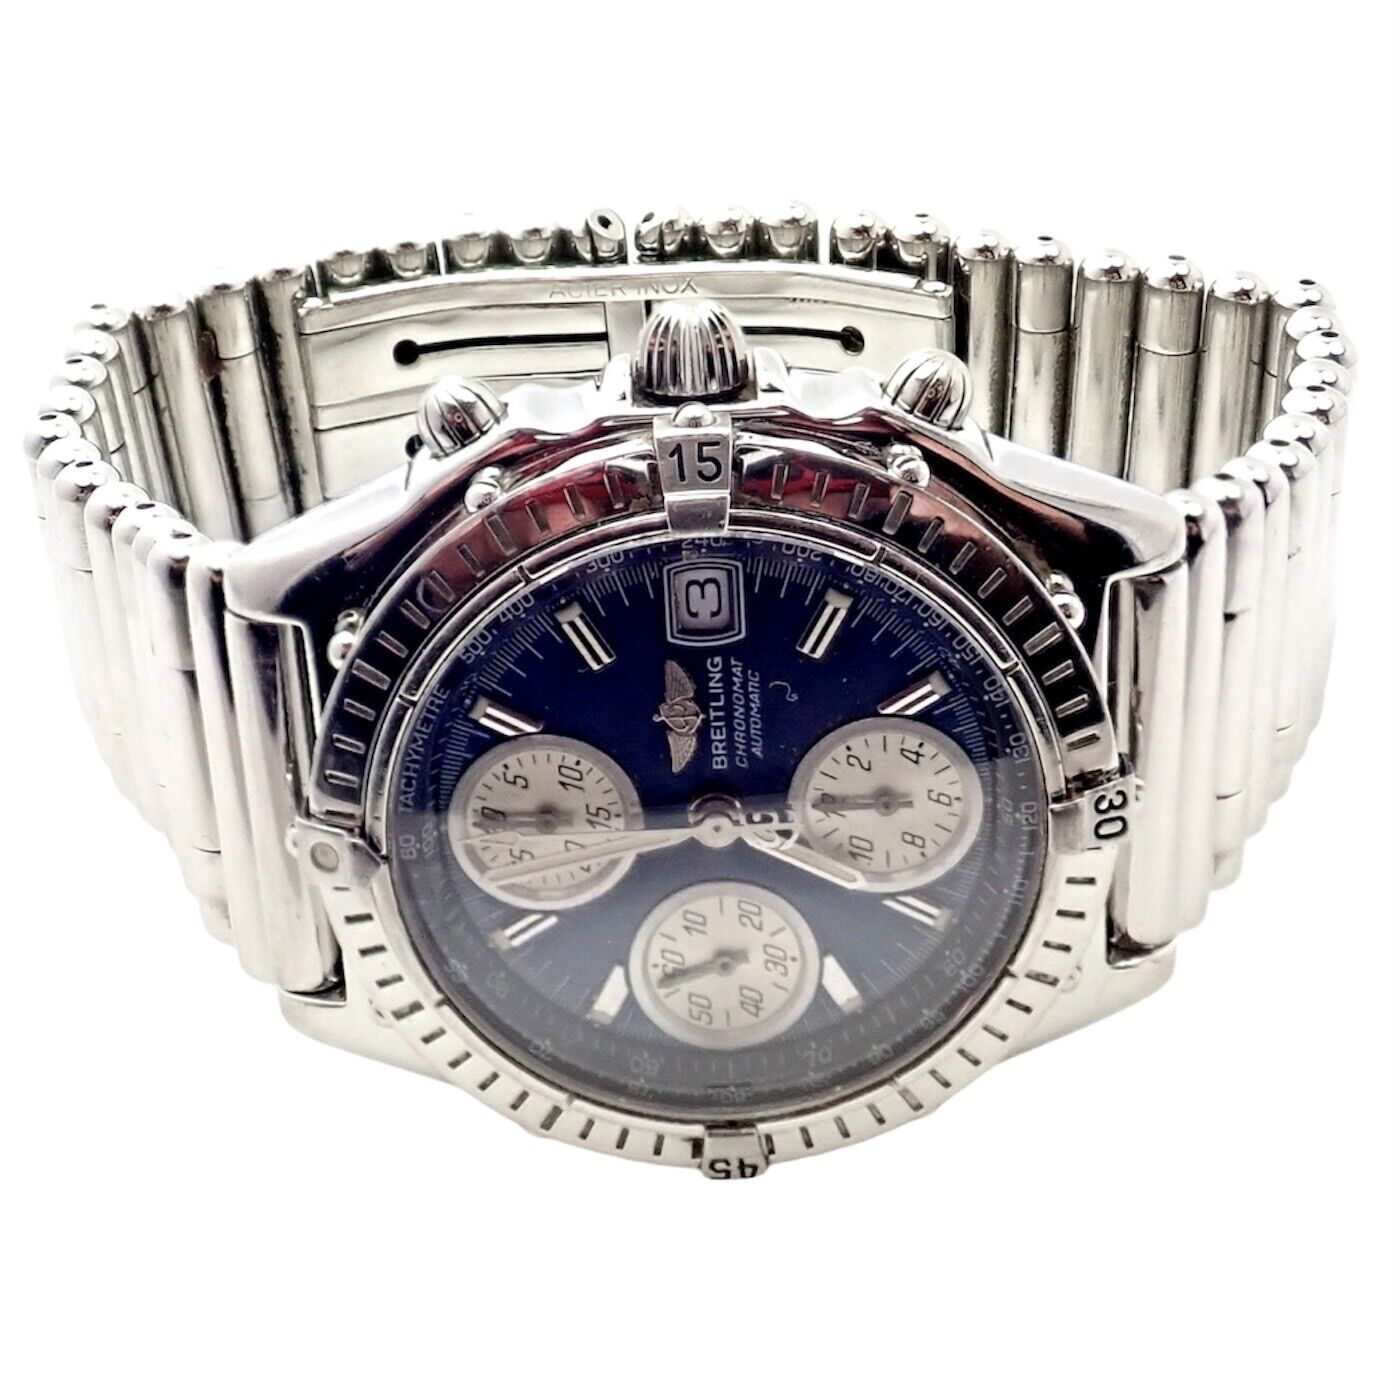 Breitling Jewelry & Watches:Watches, Parts & Accessories:Watches:Wristwatches Authentic! Breitling Chronomat Automatic Mens Watch Steel Blue Dial A13350